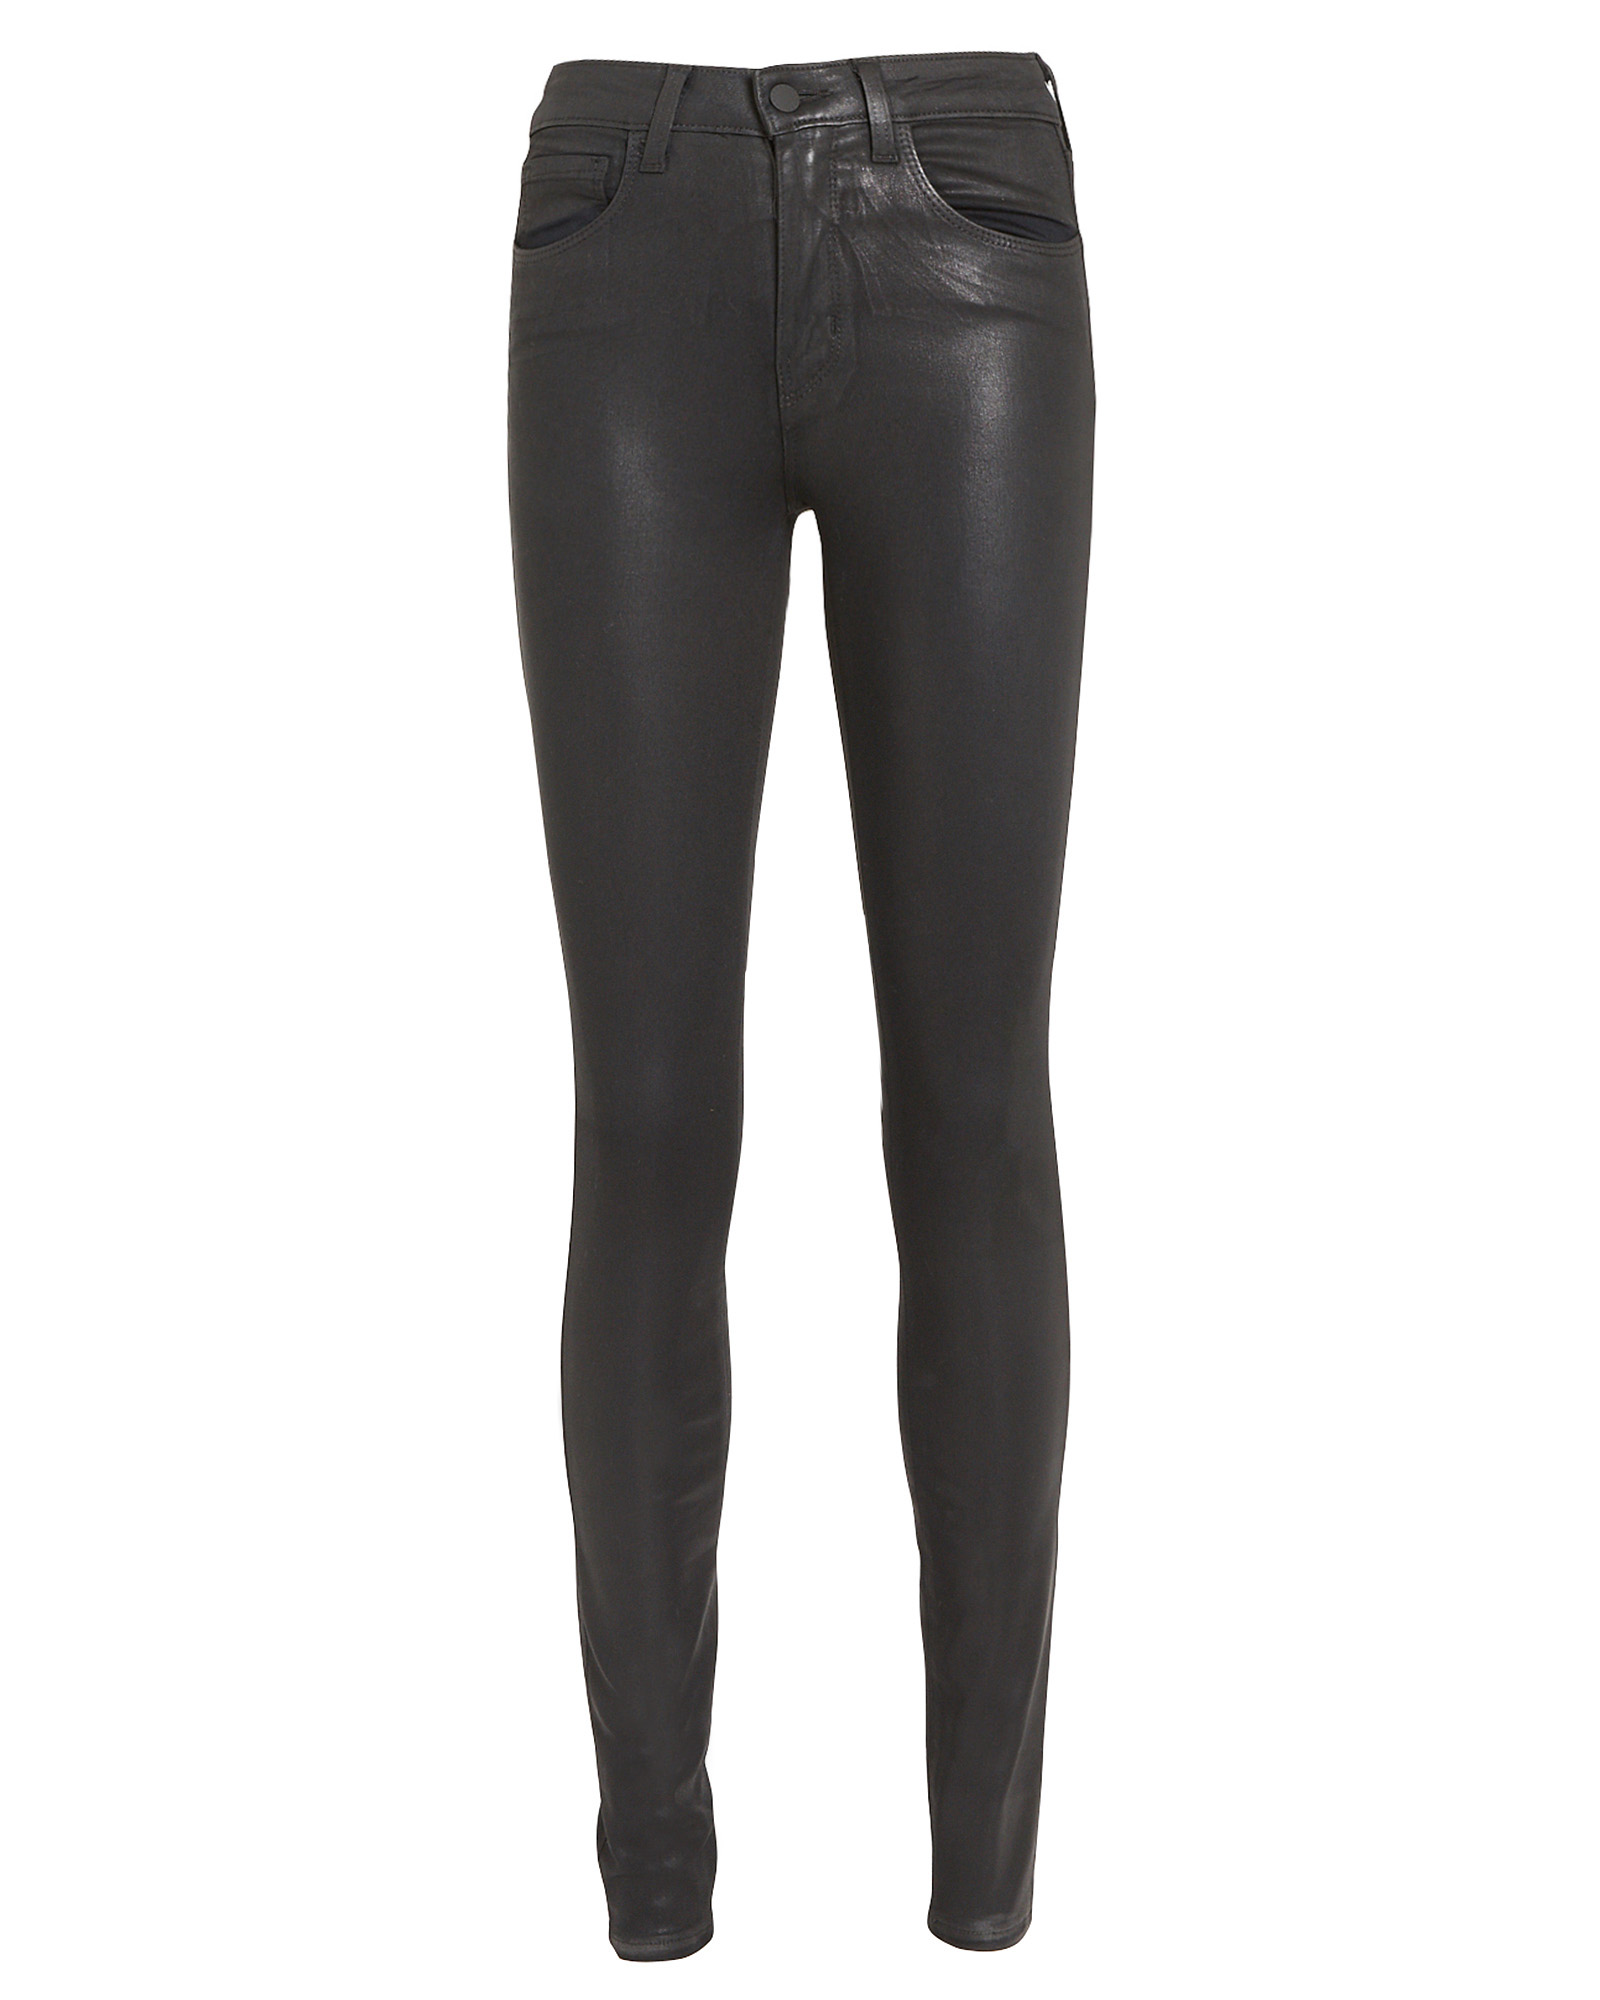 L AGENCE MARGUERITE COATED SKINNY JEANS,060036903775